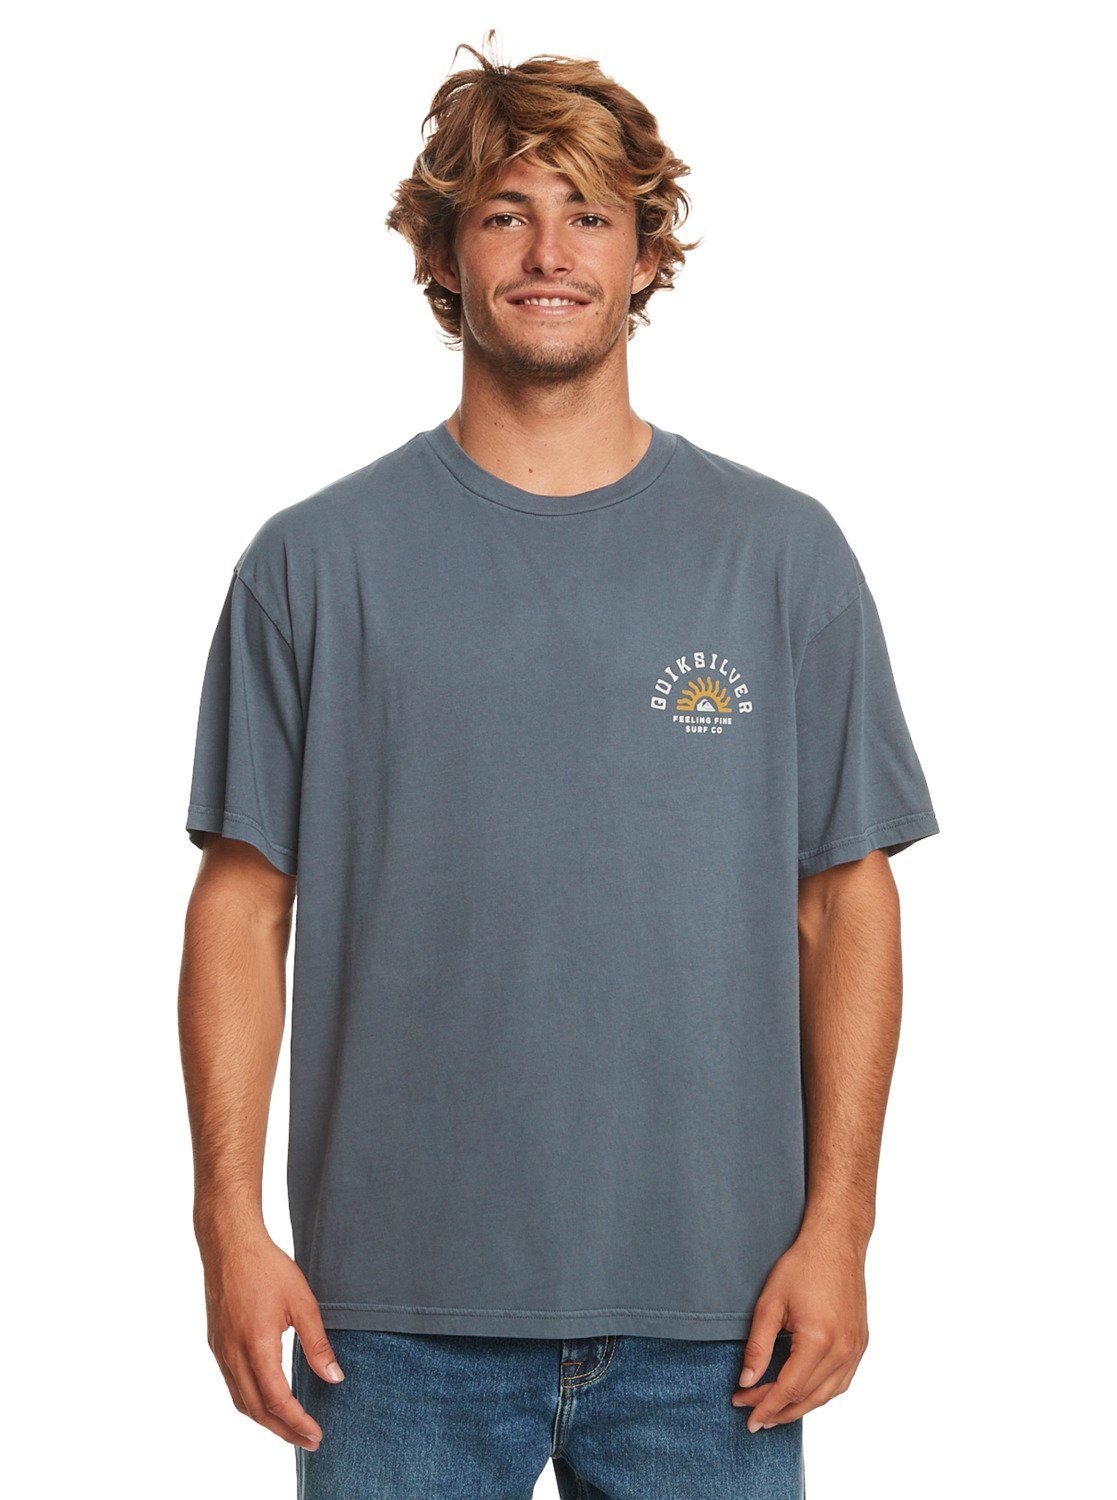 Qs T-Shirt Mind Of State Quiksilver